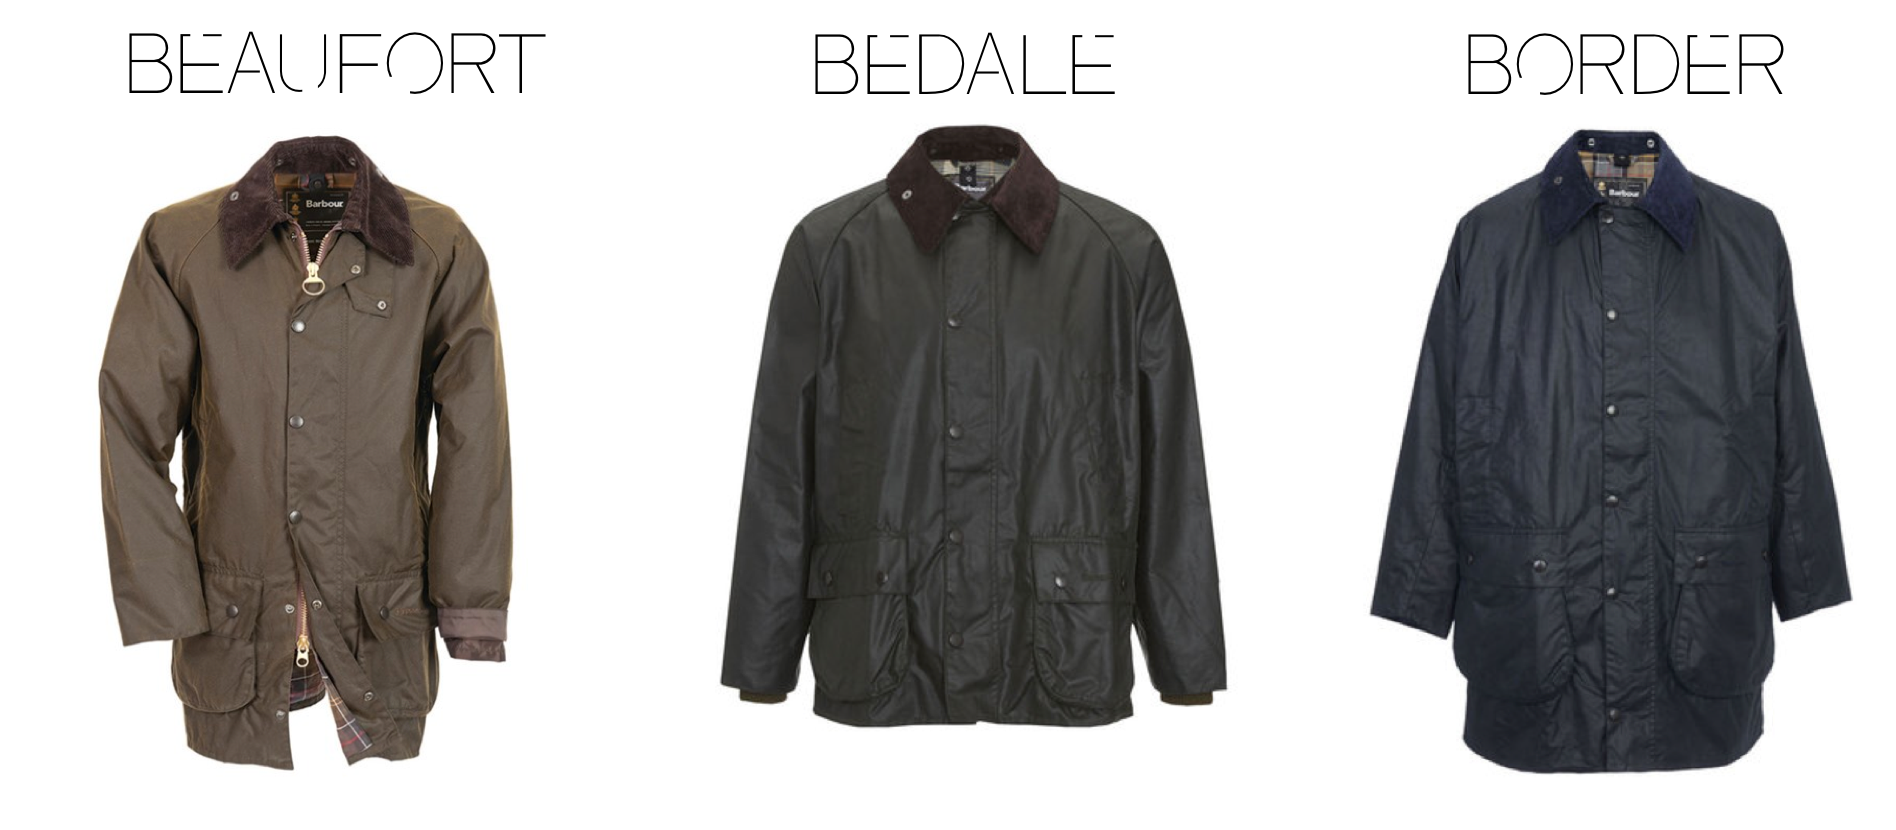 barbour jacket types off 51% - www 